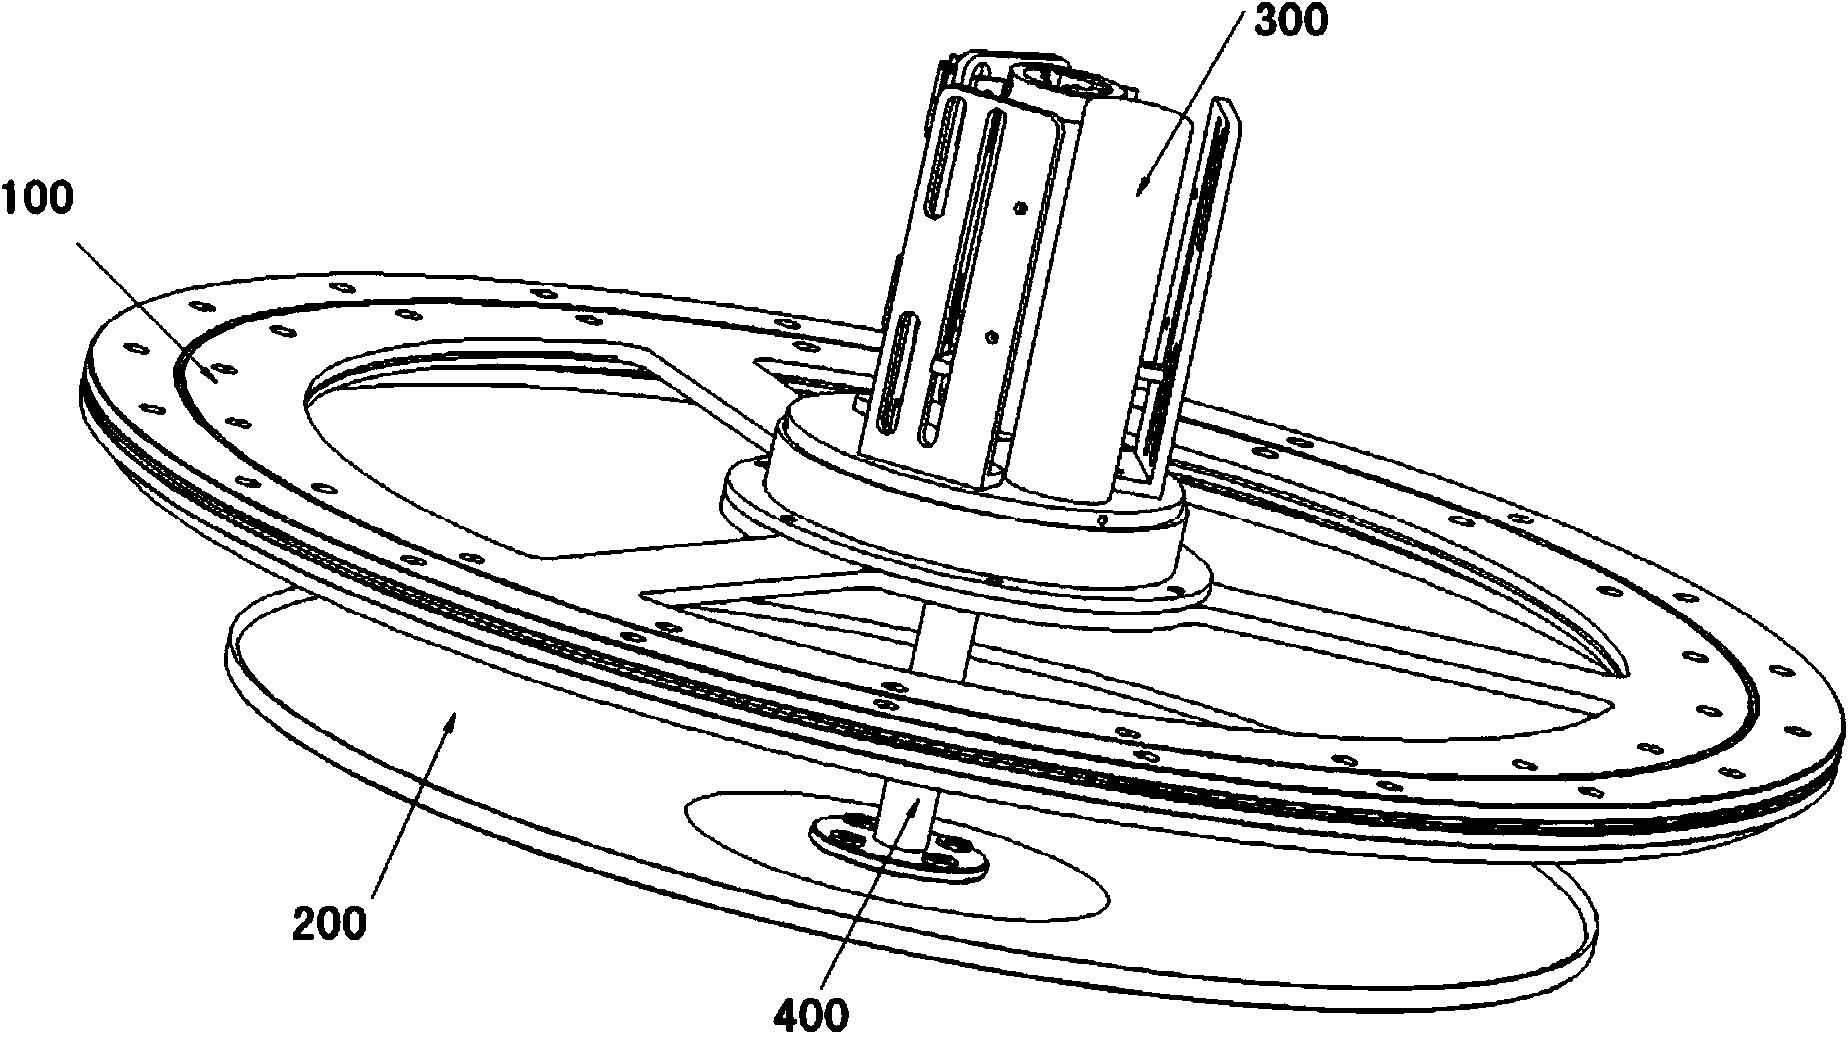 Gas exhaust device for aerostat